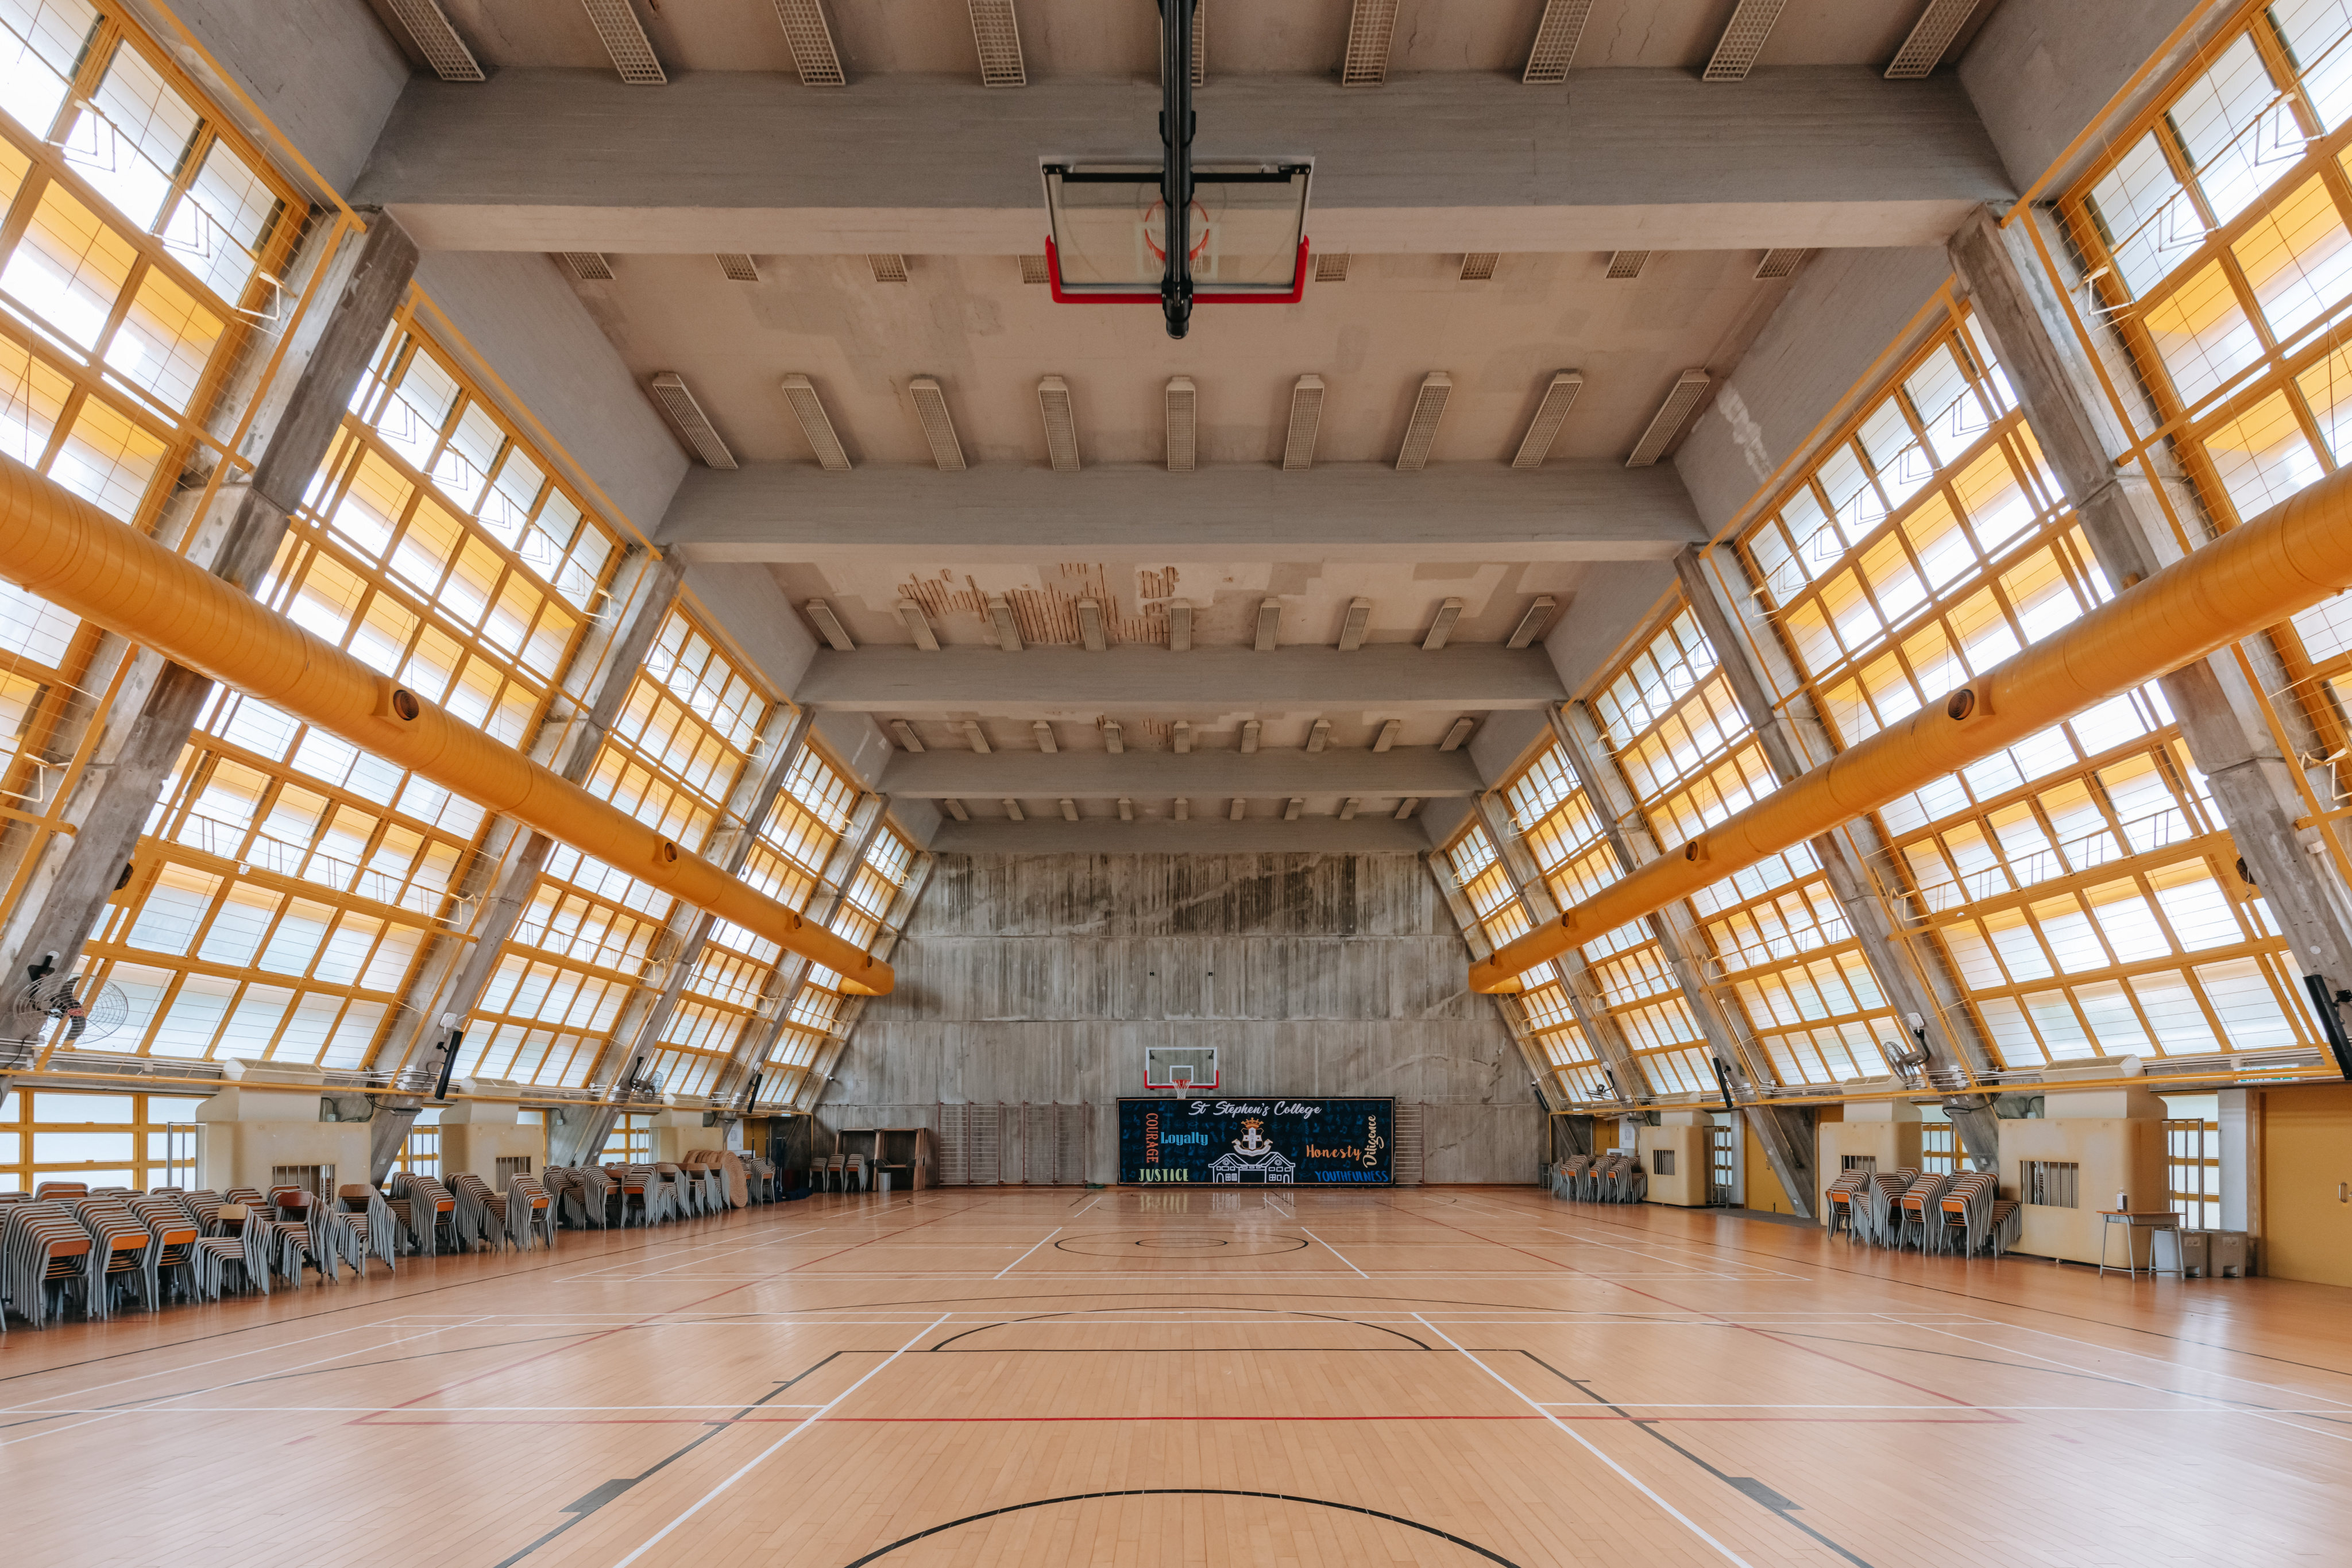 The interior of the Brutalist gymnasium designed by Ho Tao at St Stephen’s College, Stanley. When a global survey of Brutalism cited only this building in Hong Kong, architects set out to find and celebrate more of them. Photo: Kevin Mak/1km Studio